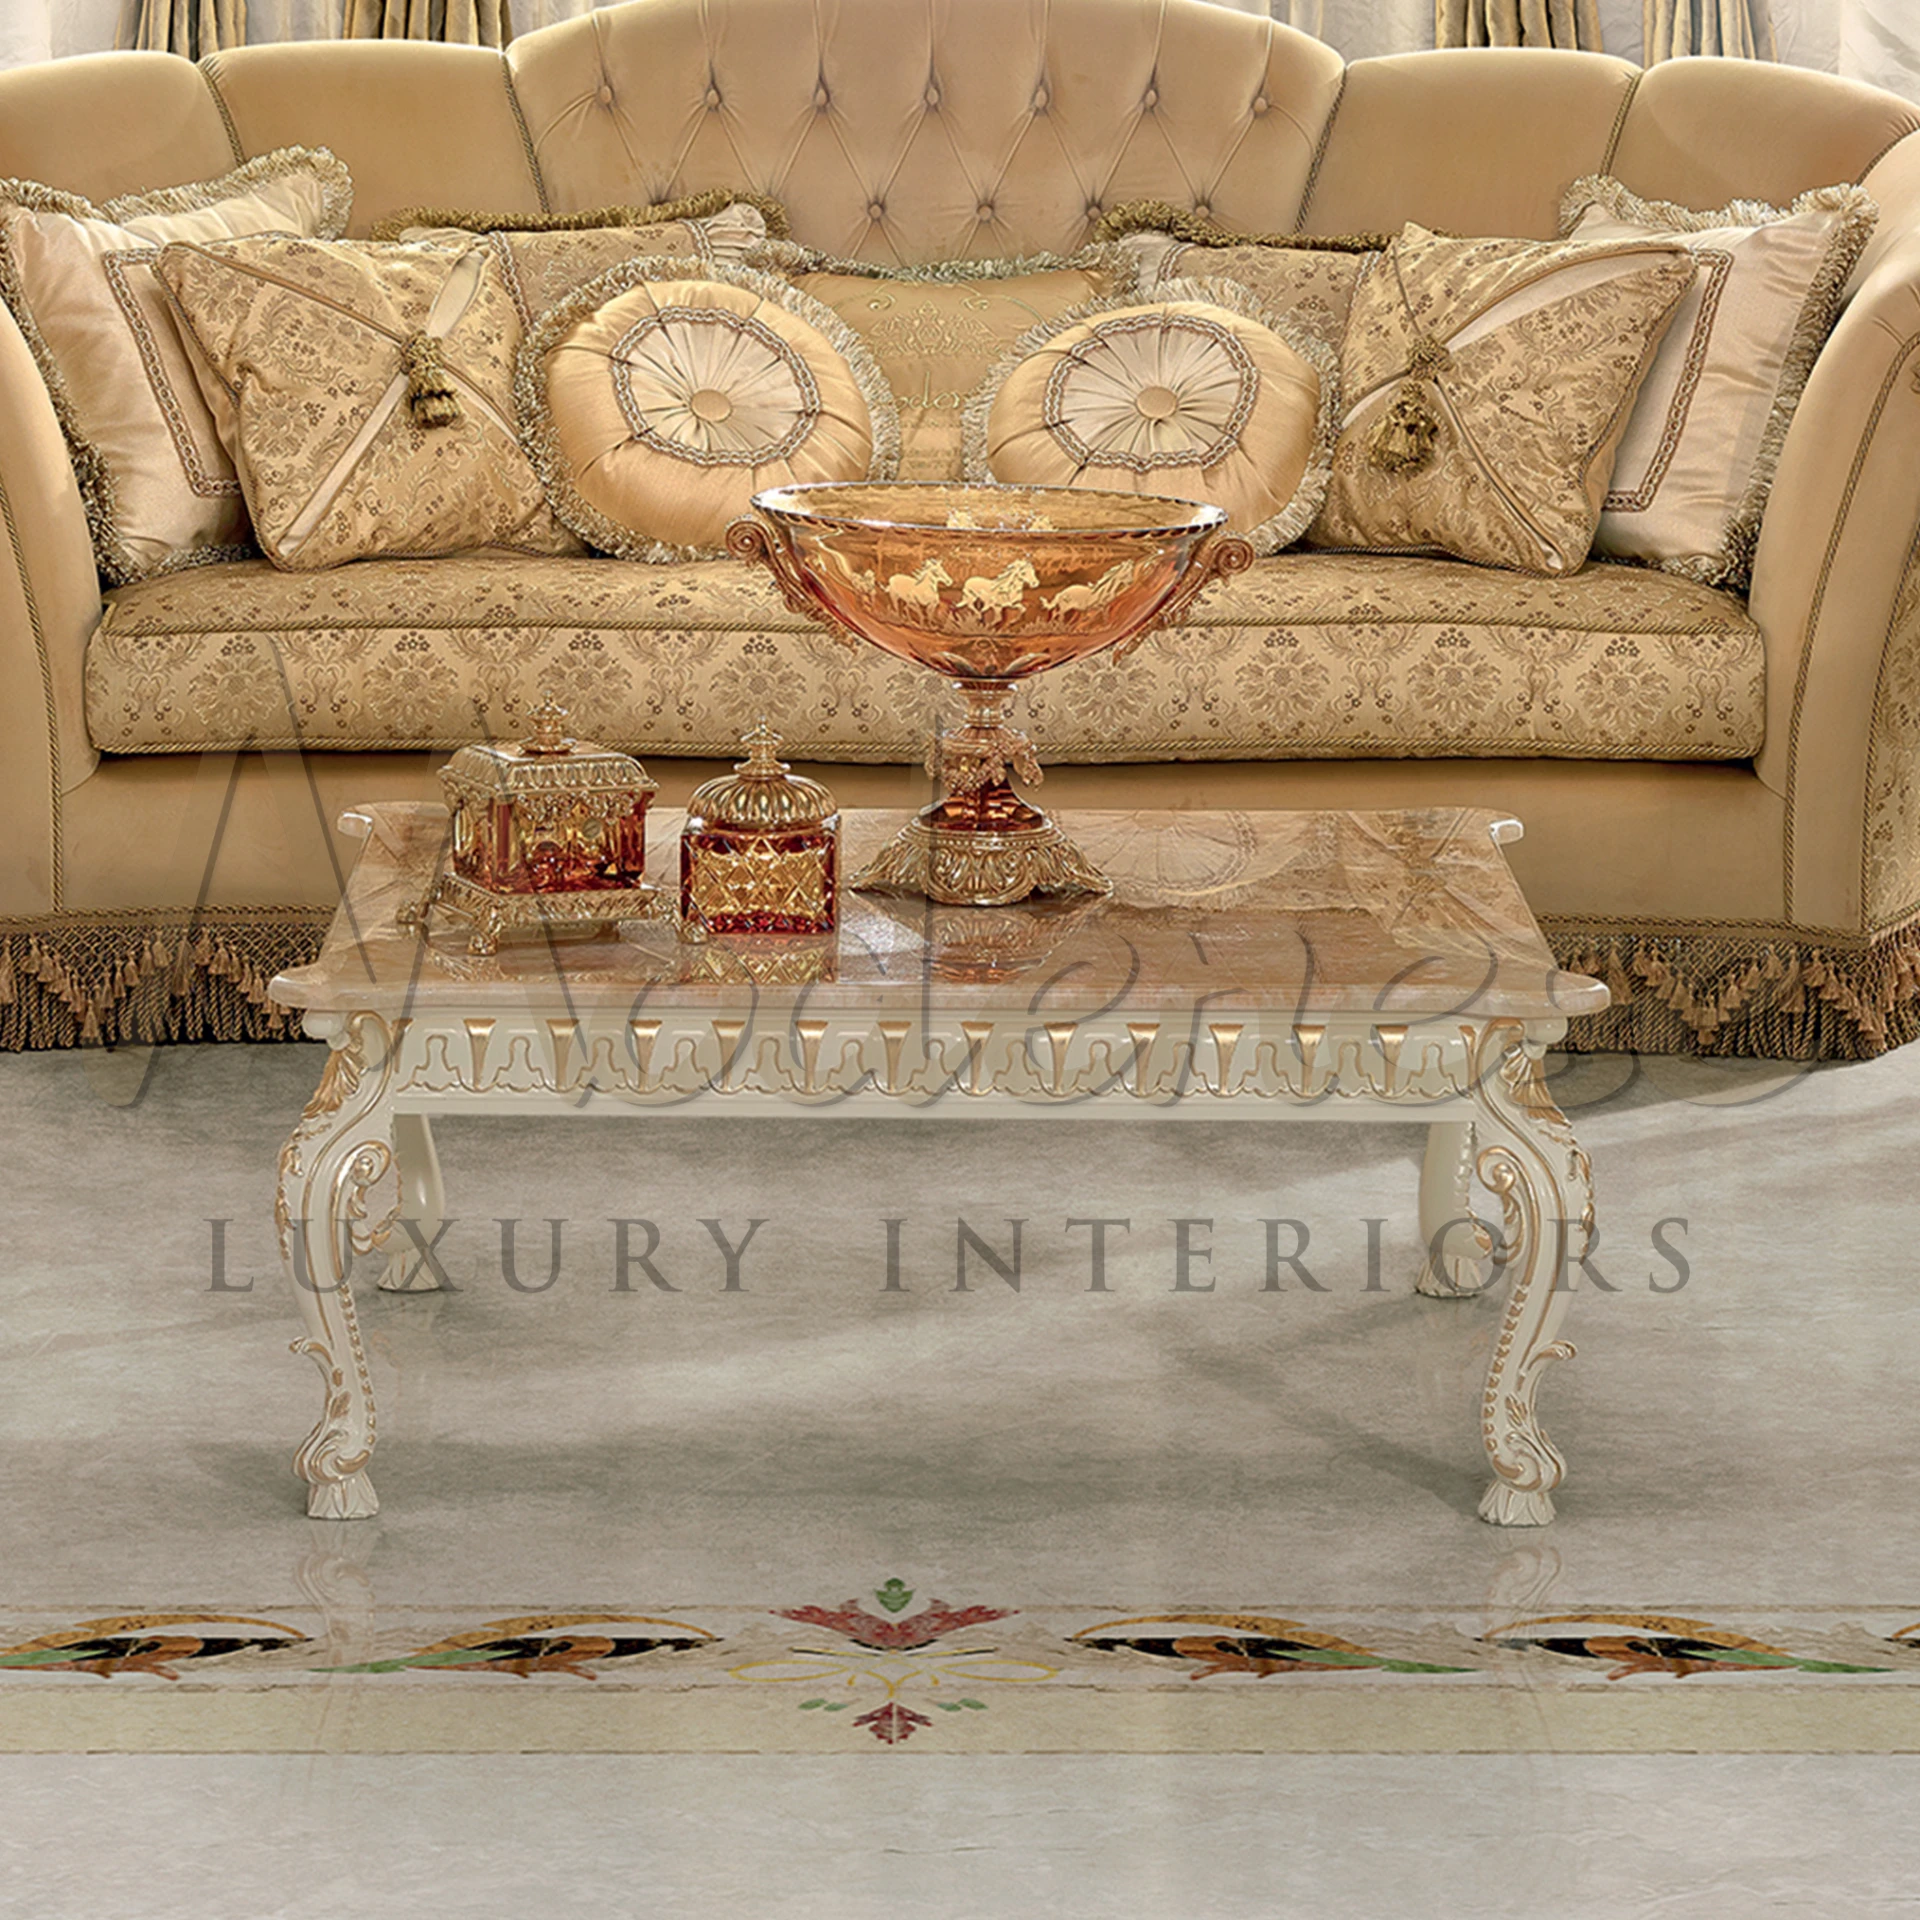 Elegant marble coffee table for high-end luxury decor.